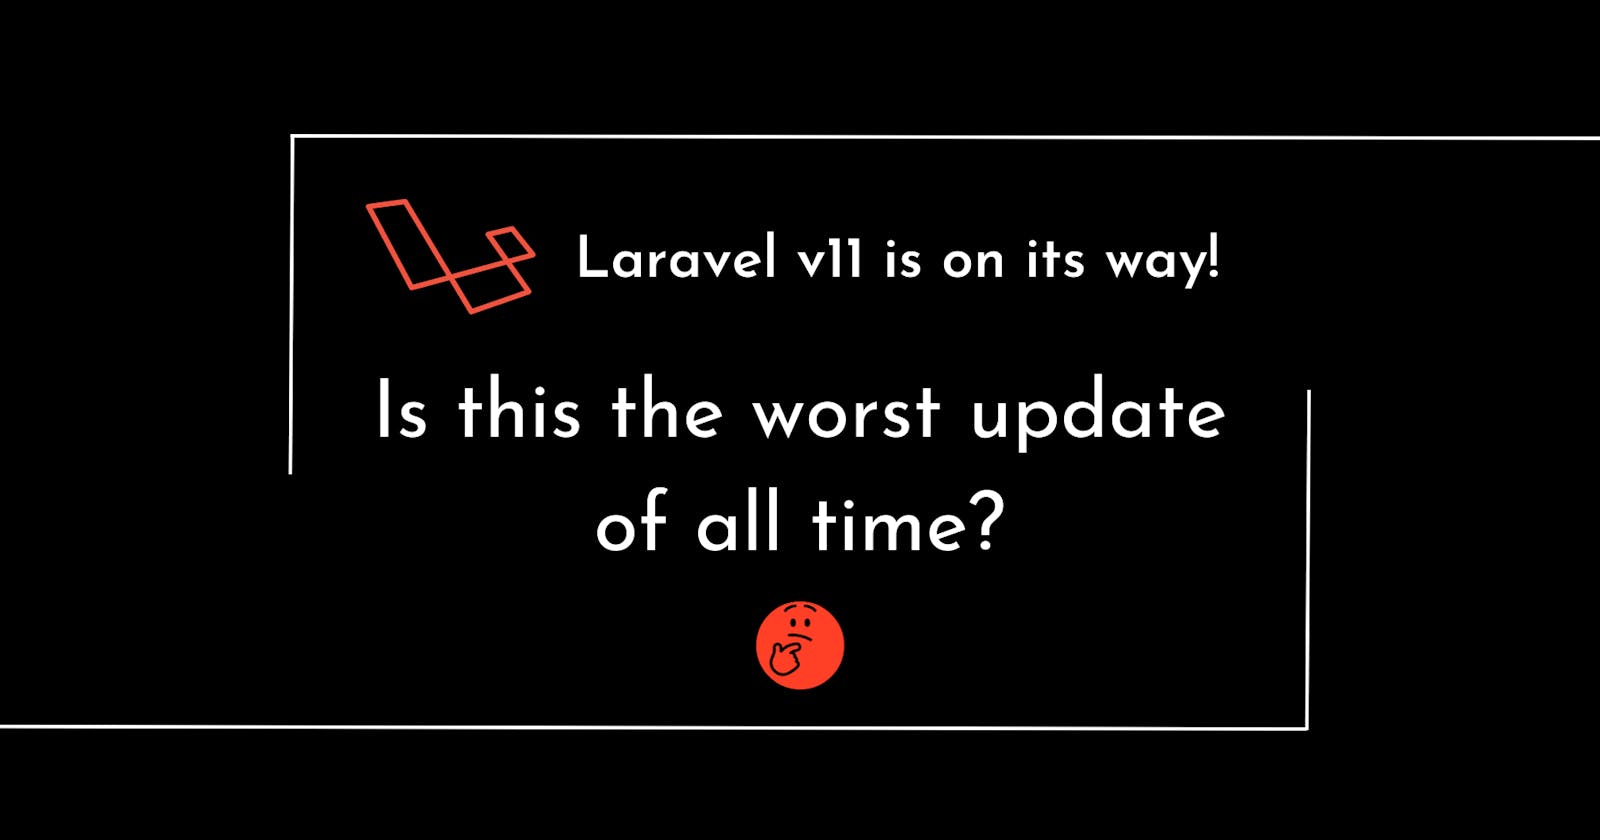 Laravel v11 is on its way! Is this the worst update of all time?